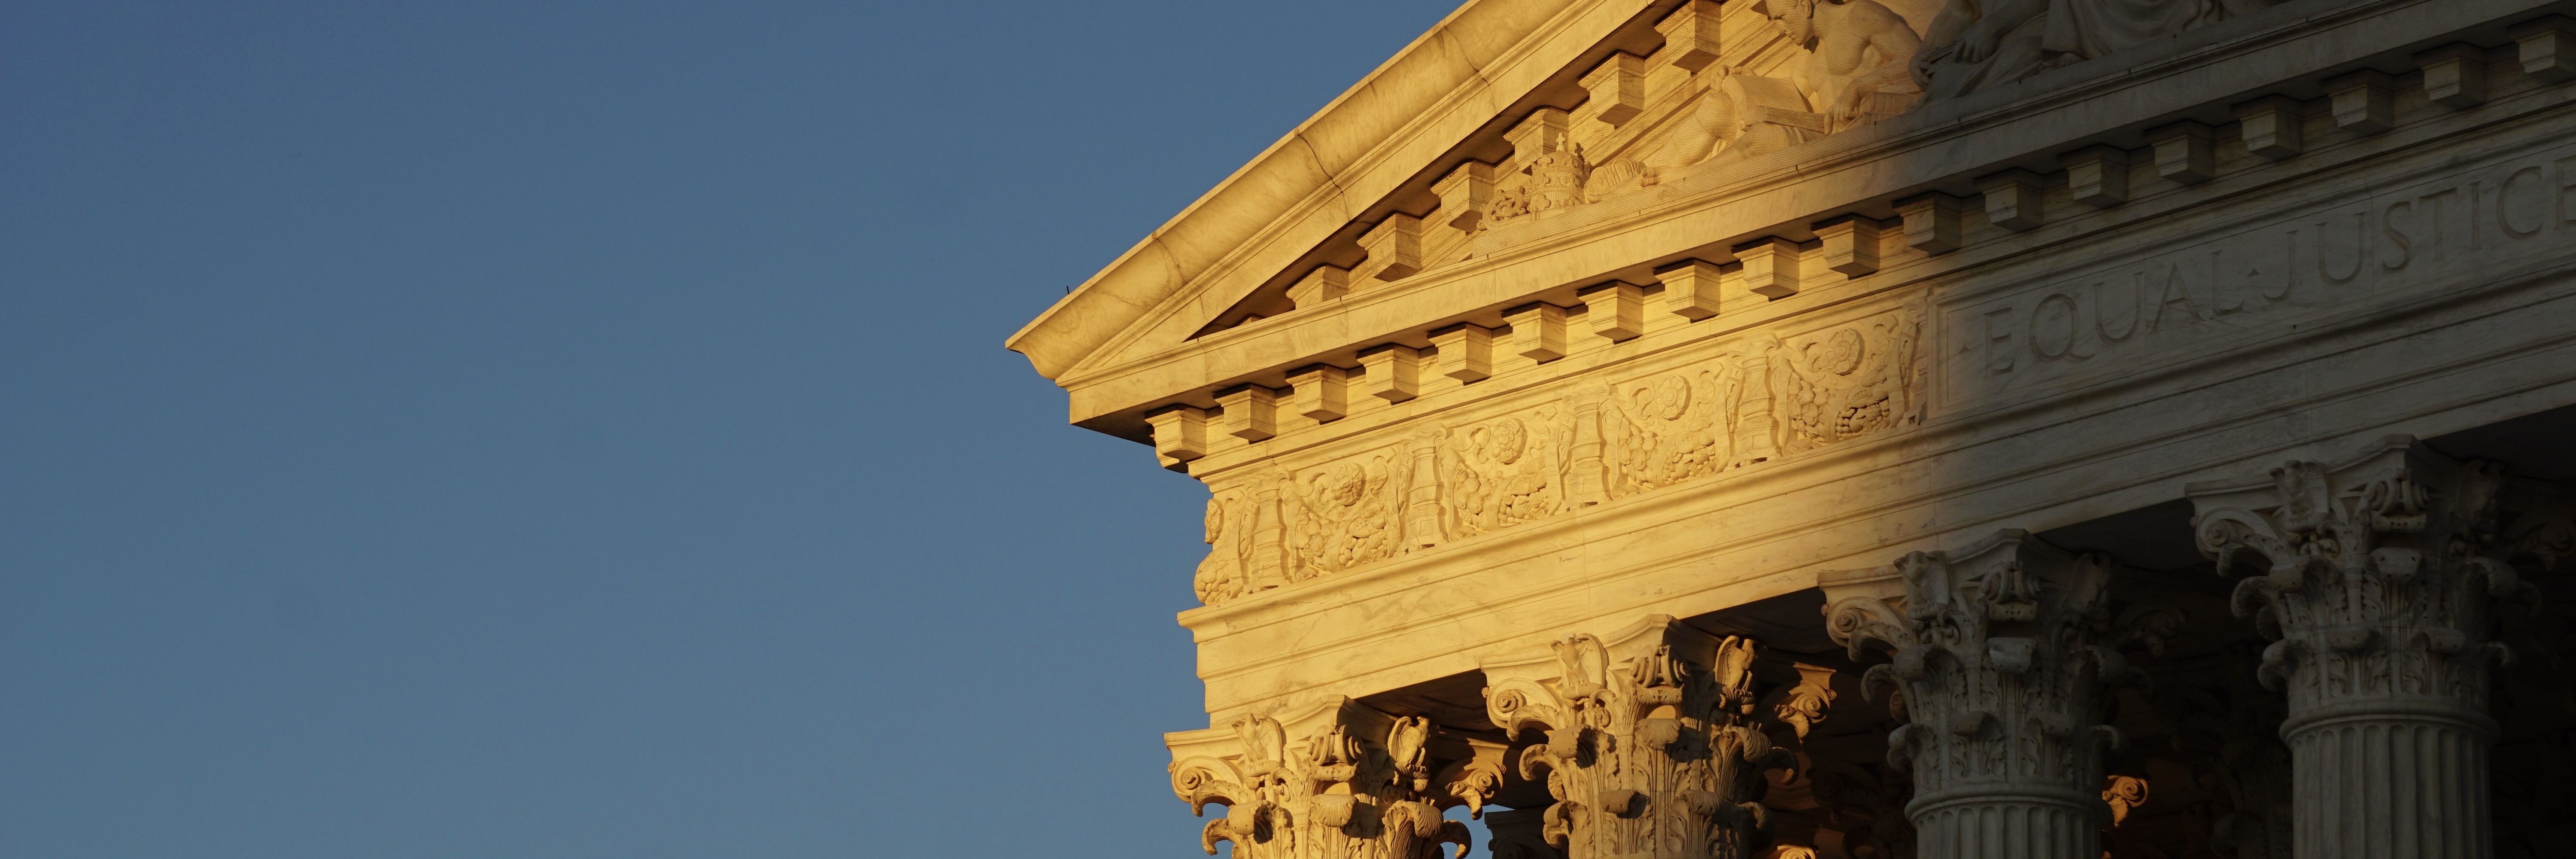 Close-up of the Supreme Court building at sunset